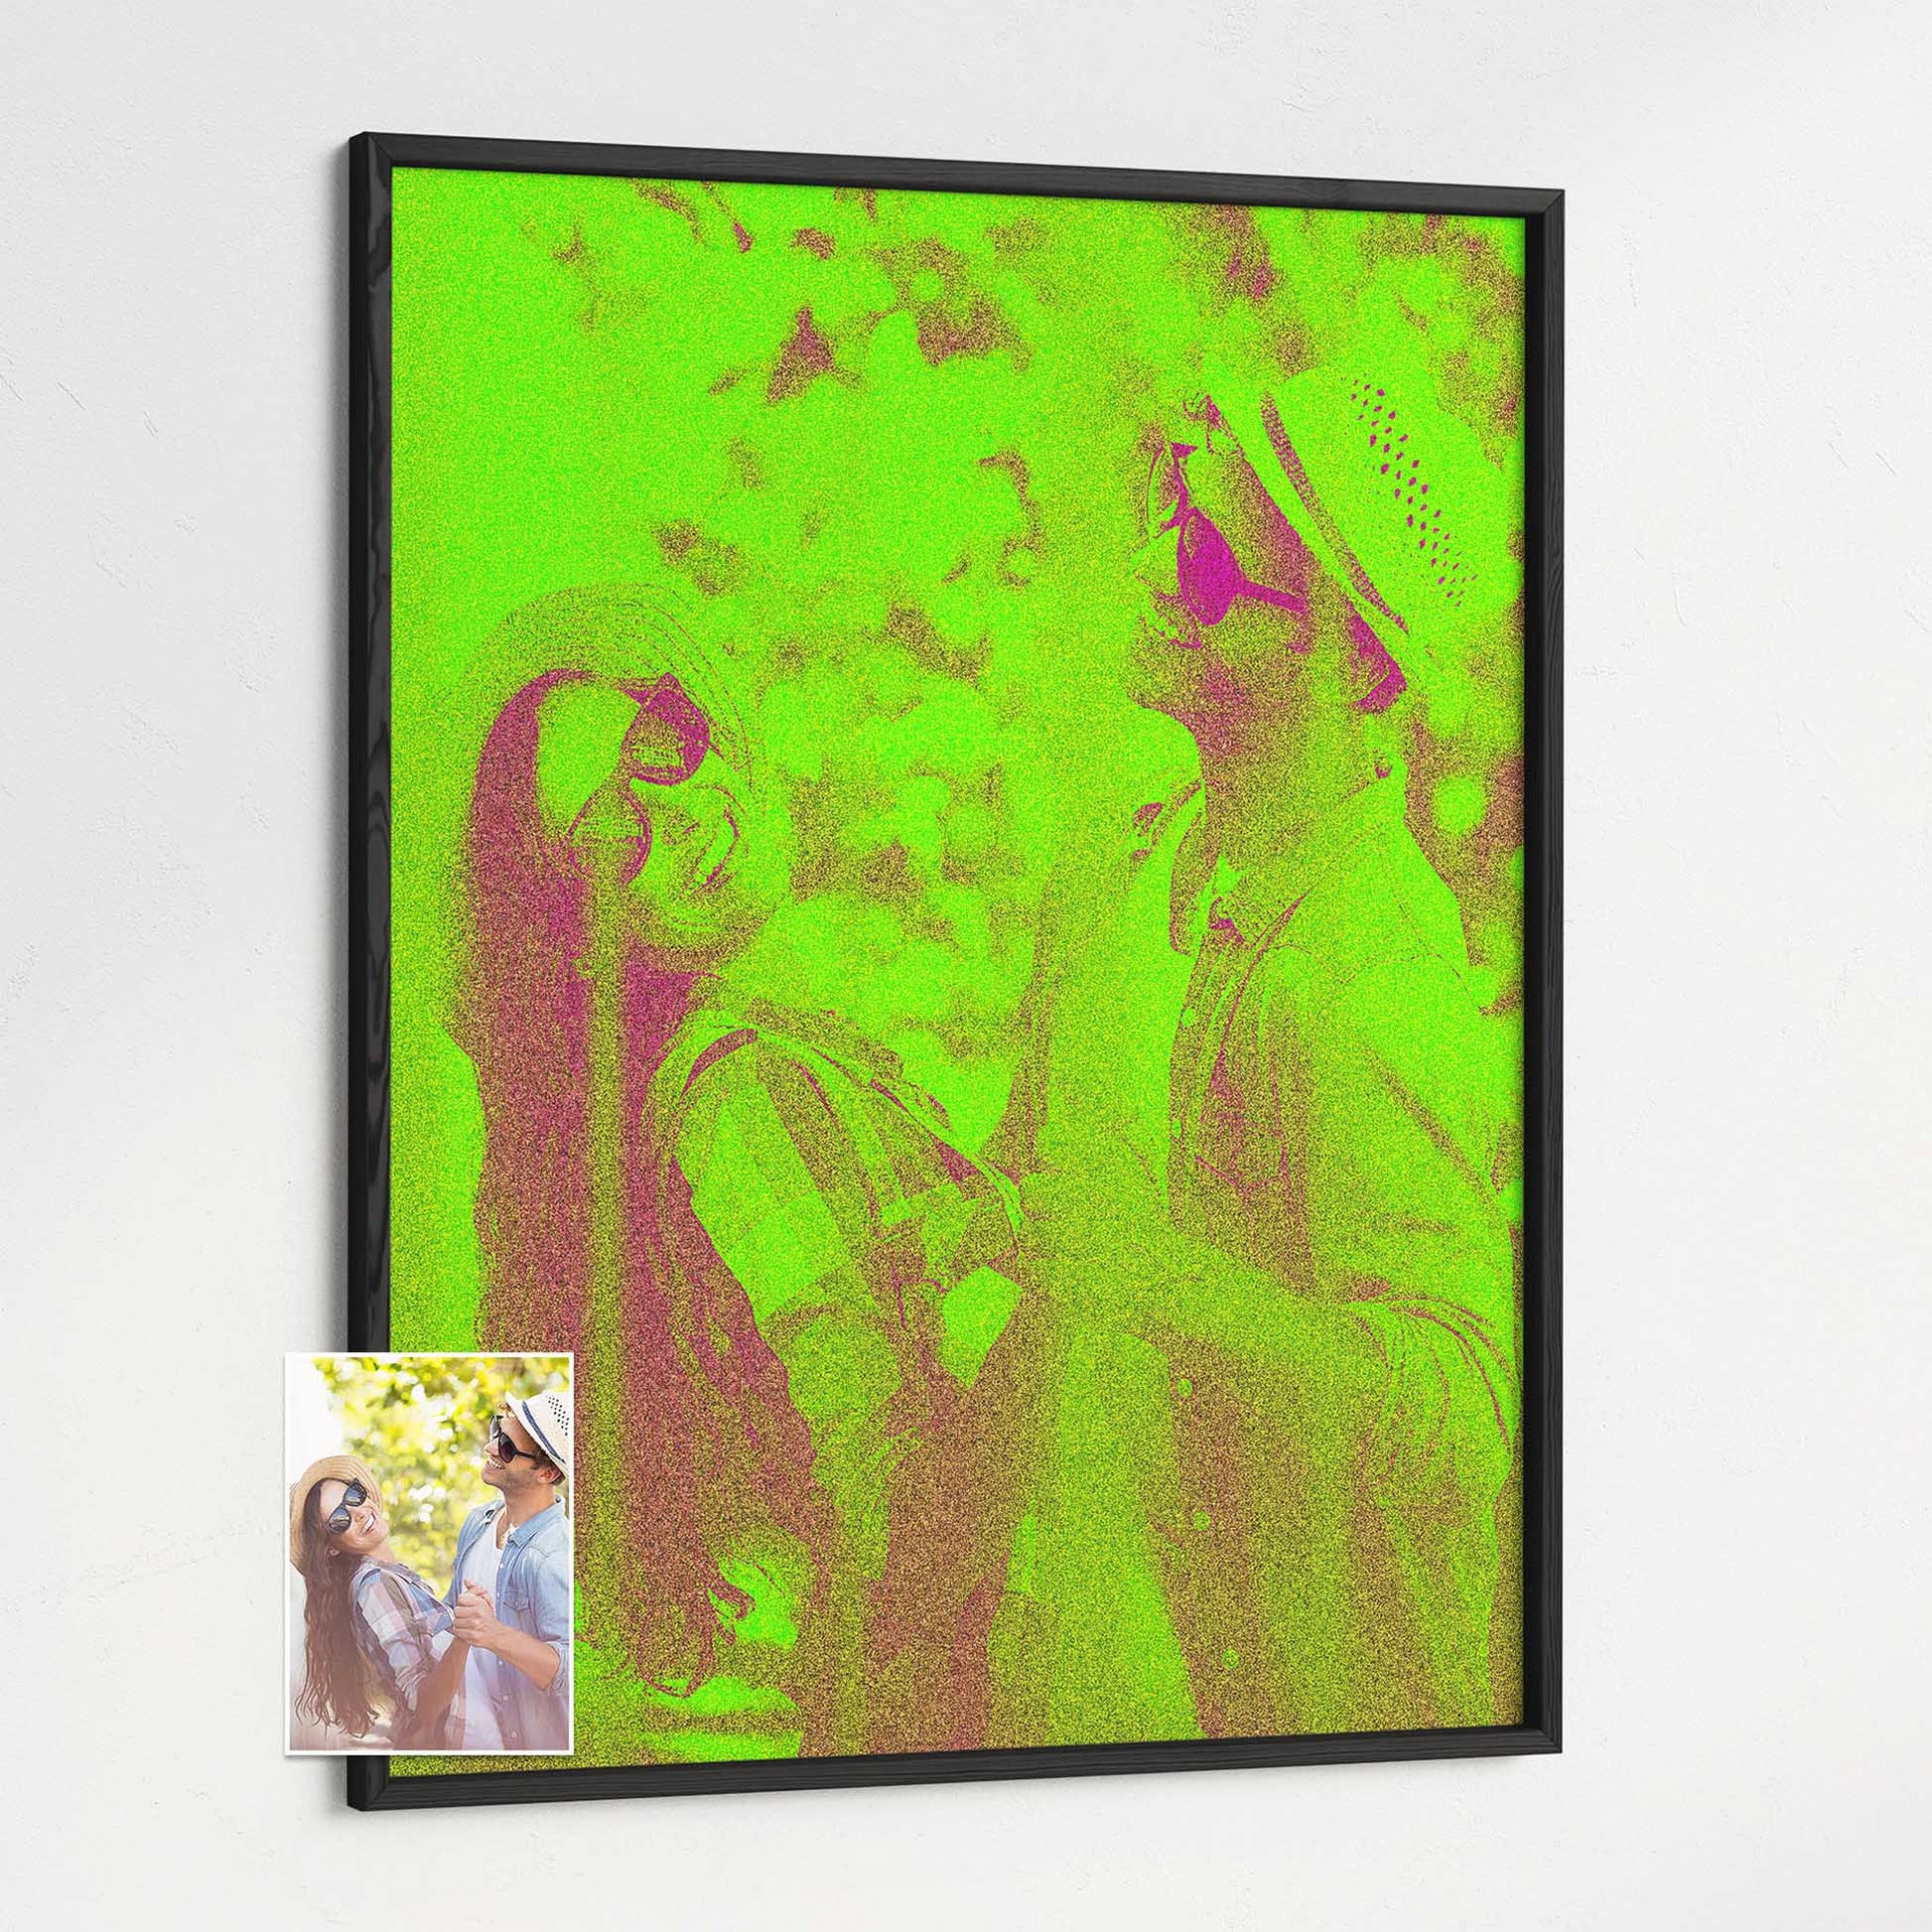 Let the neon green magic illuminate your space with our Personalised Neon Green Framed Print. The bright and captivating hues bring a sense of fun and light to your home. Crafted from your photo, this unique artwork 